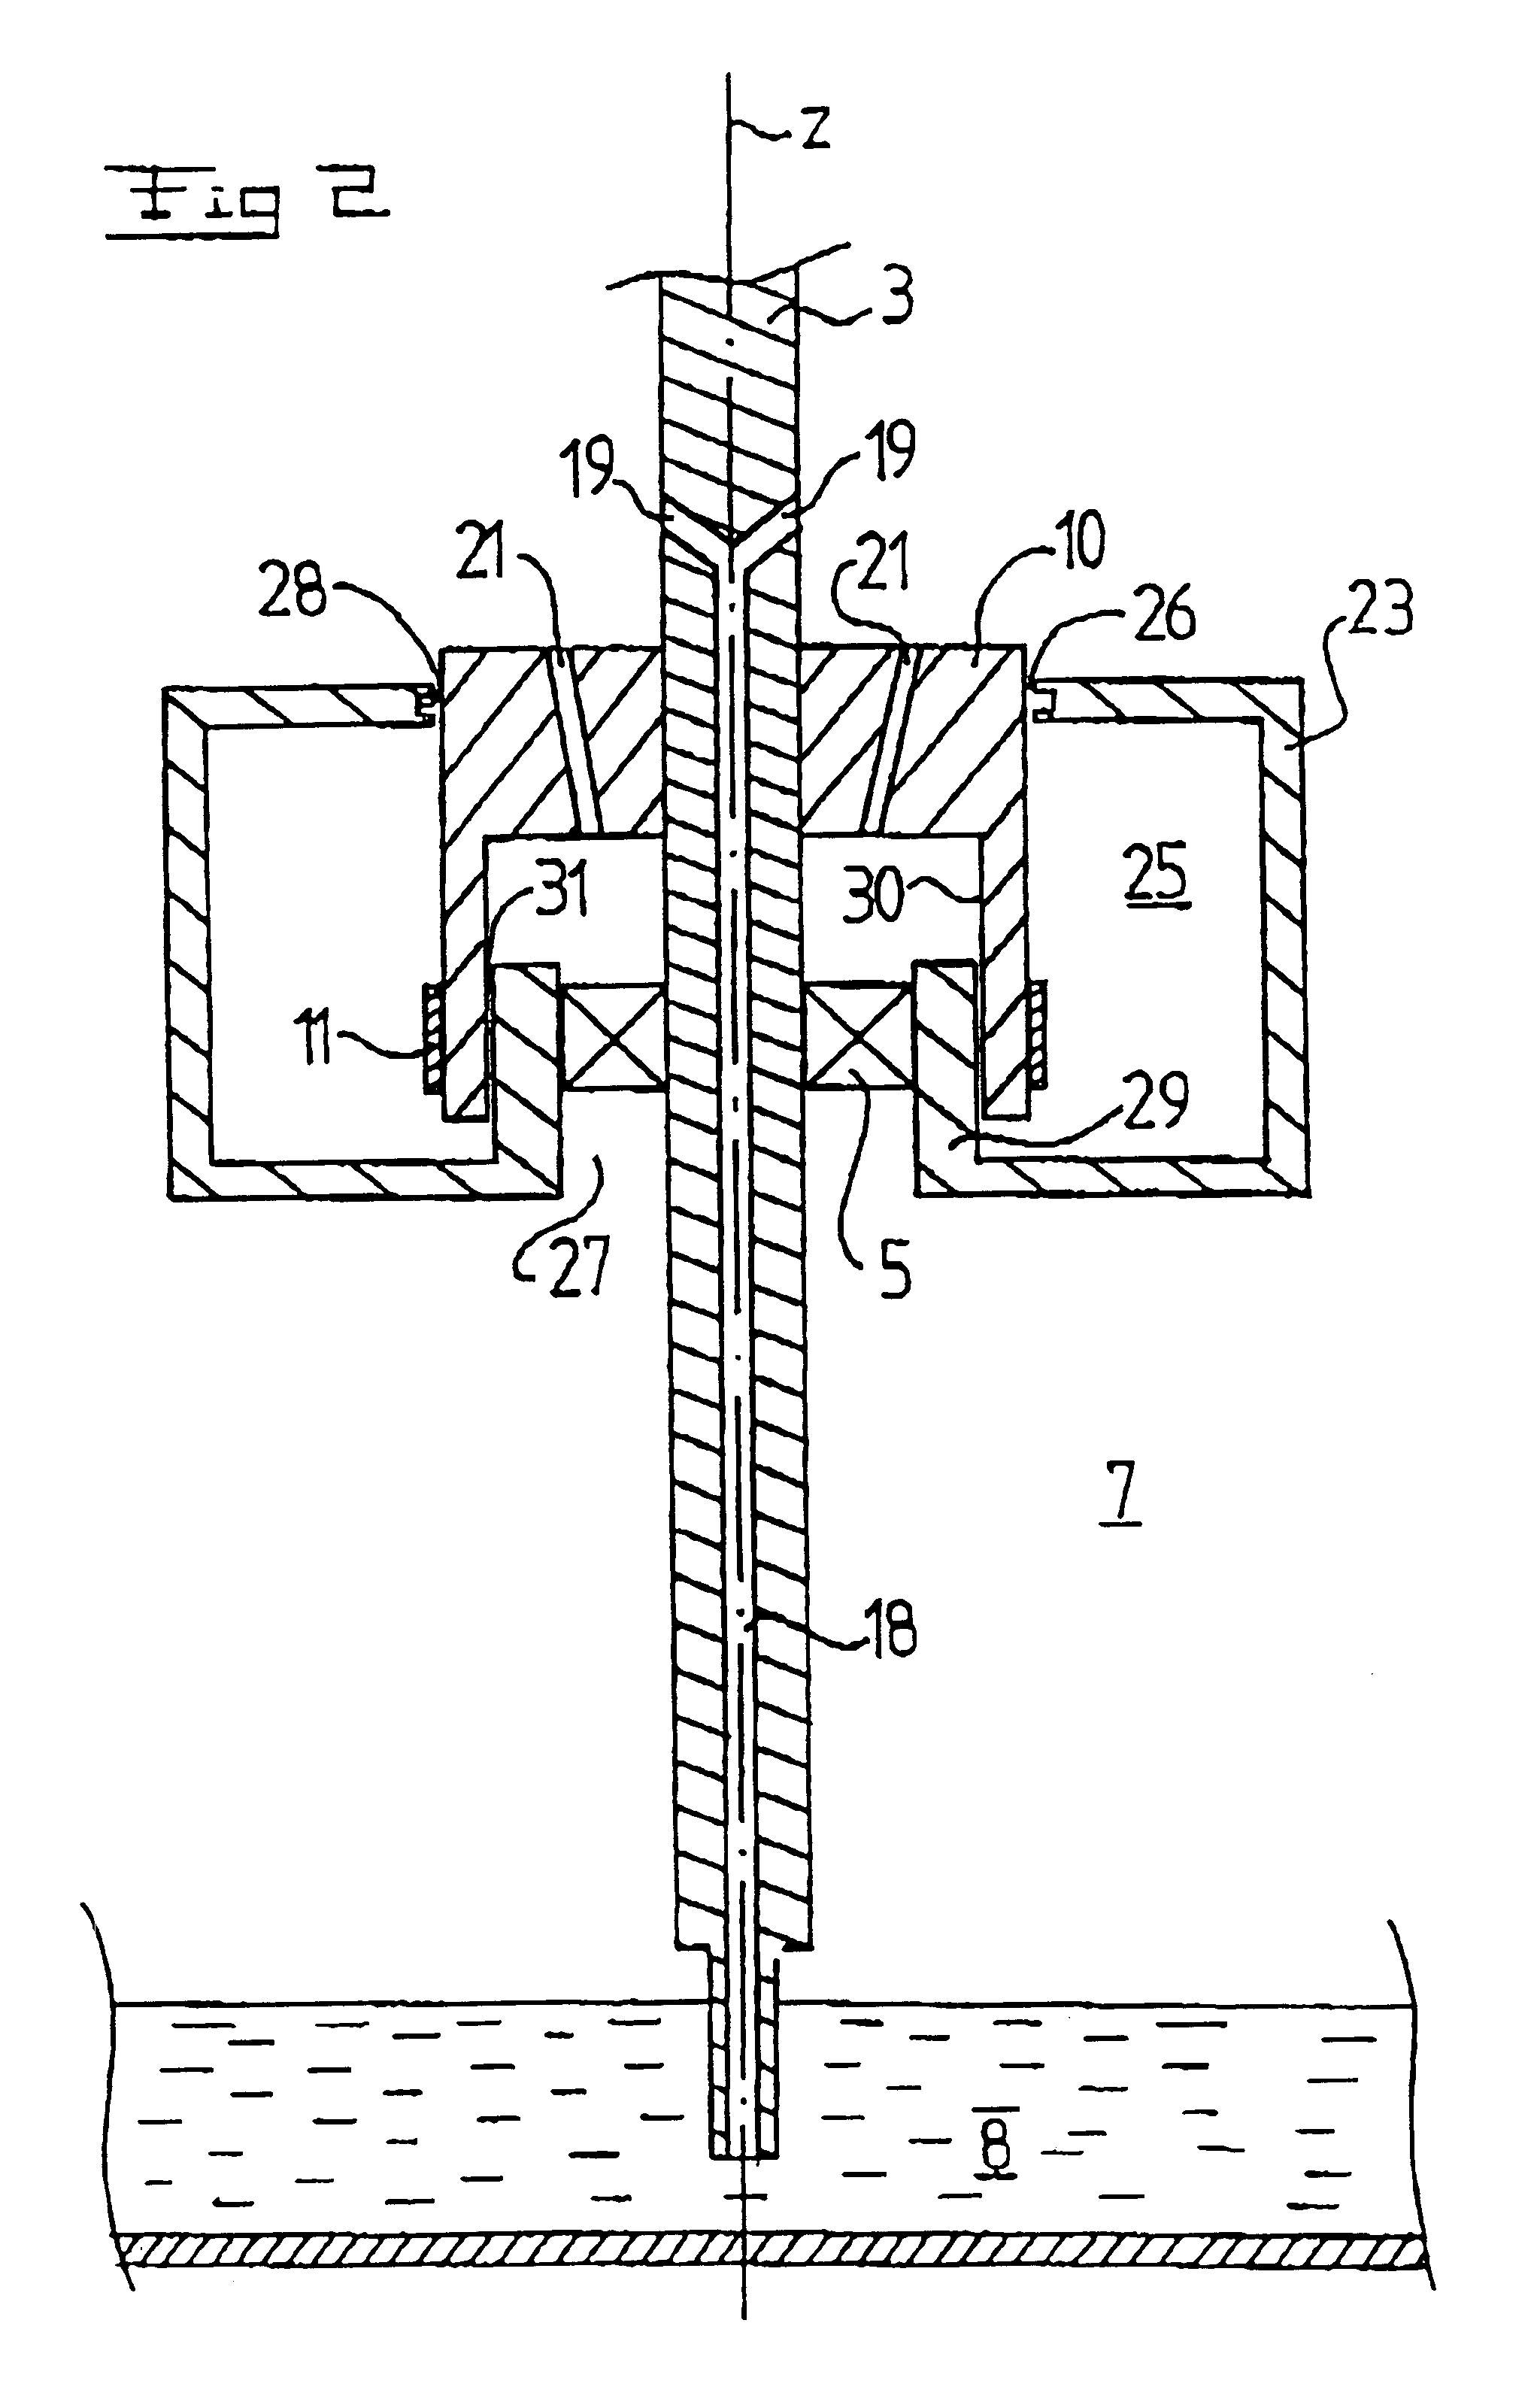 Drive unit for centrifuge rotor of a centrifugal separator